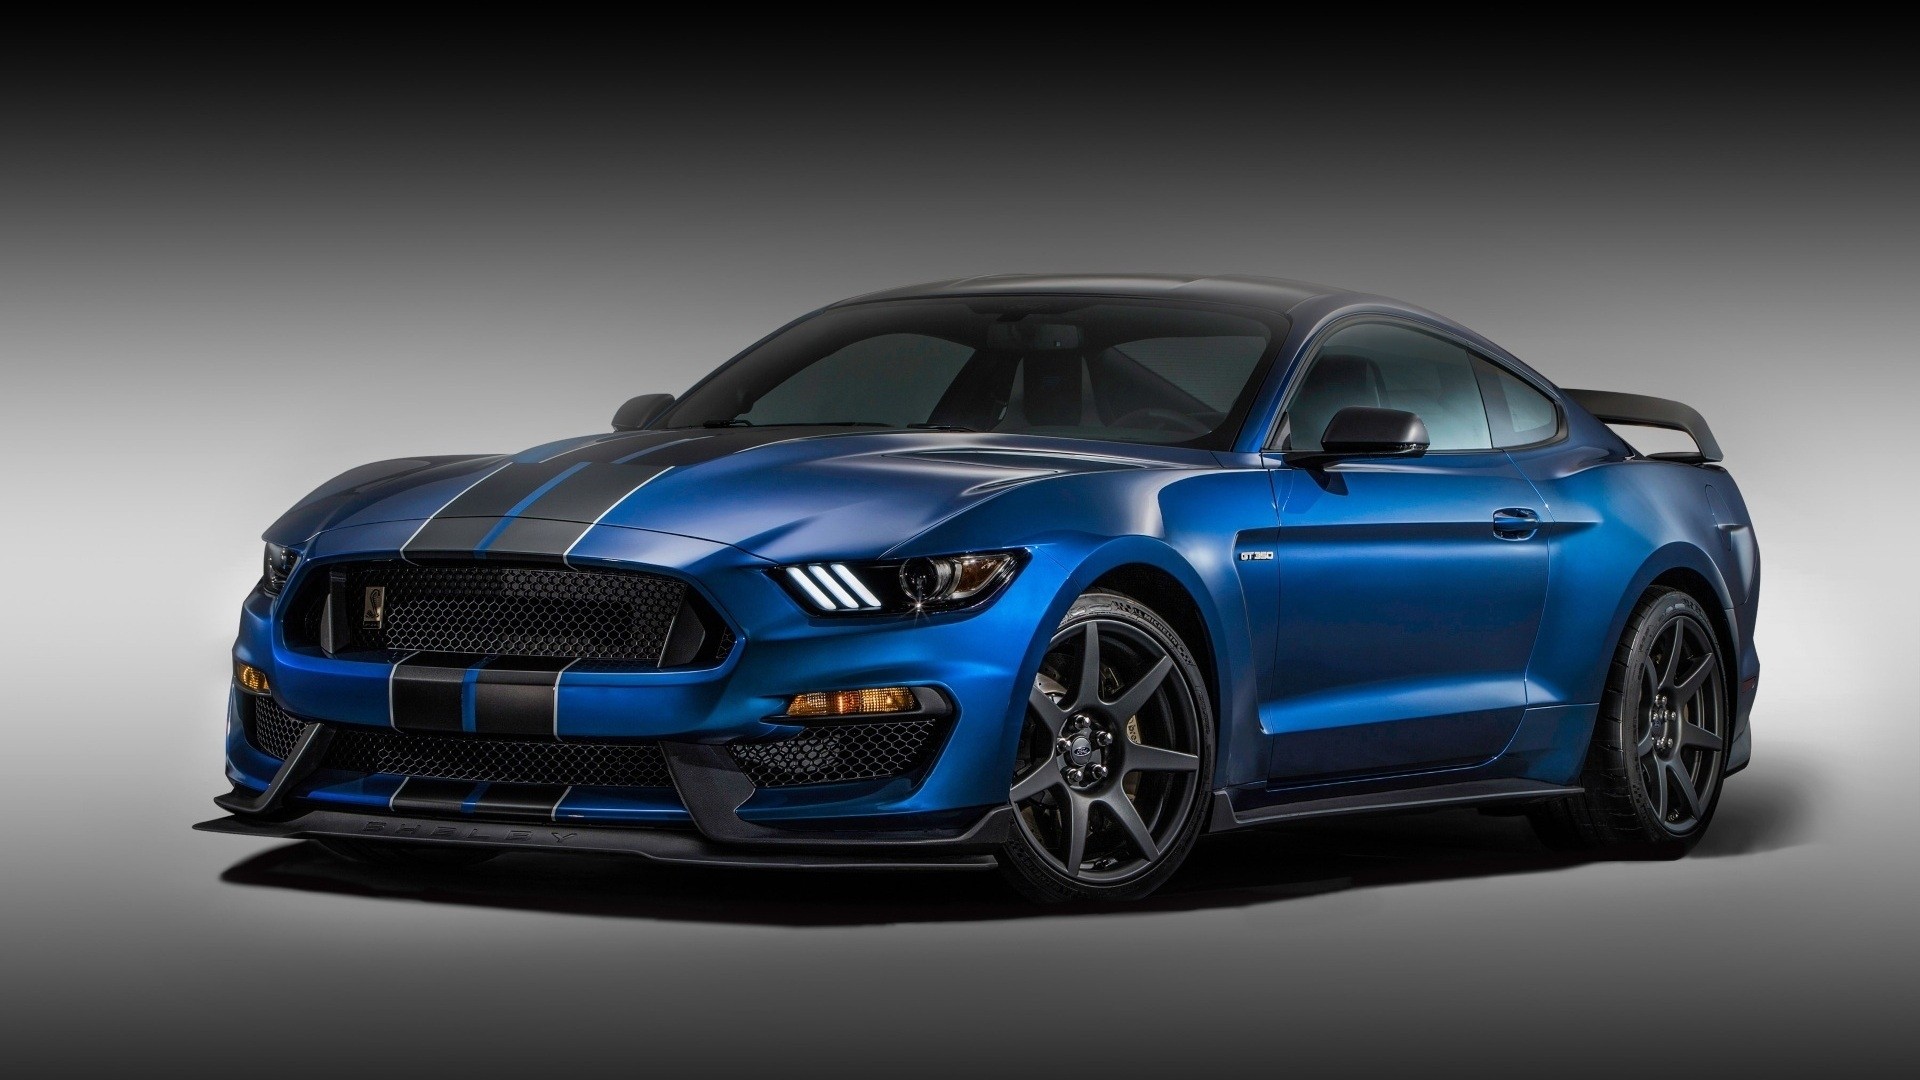 Ford Ford Mustang Shelby Gt350 Wallpapers Hd Desktop And Mobile Backgrounds